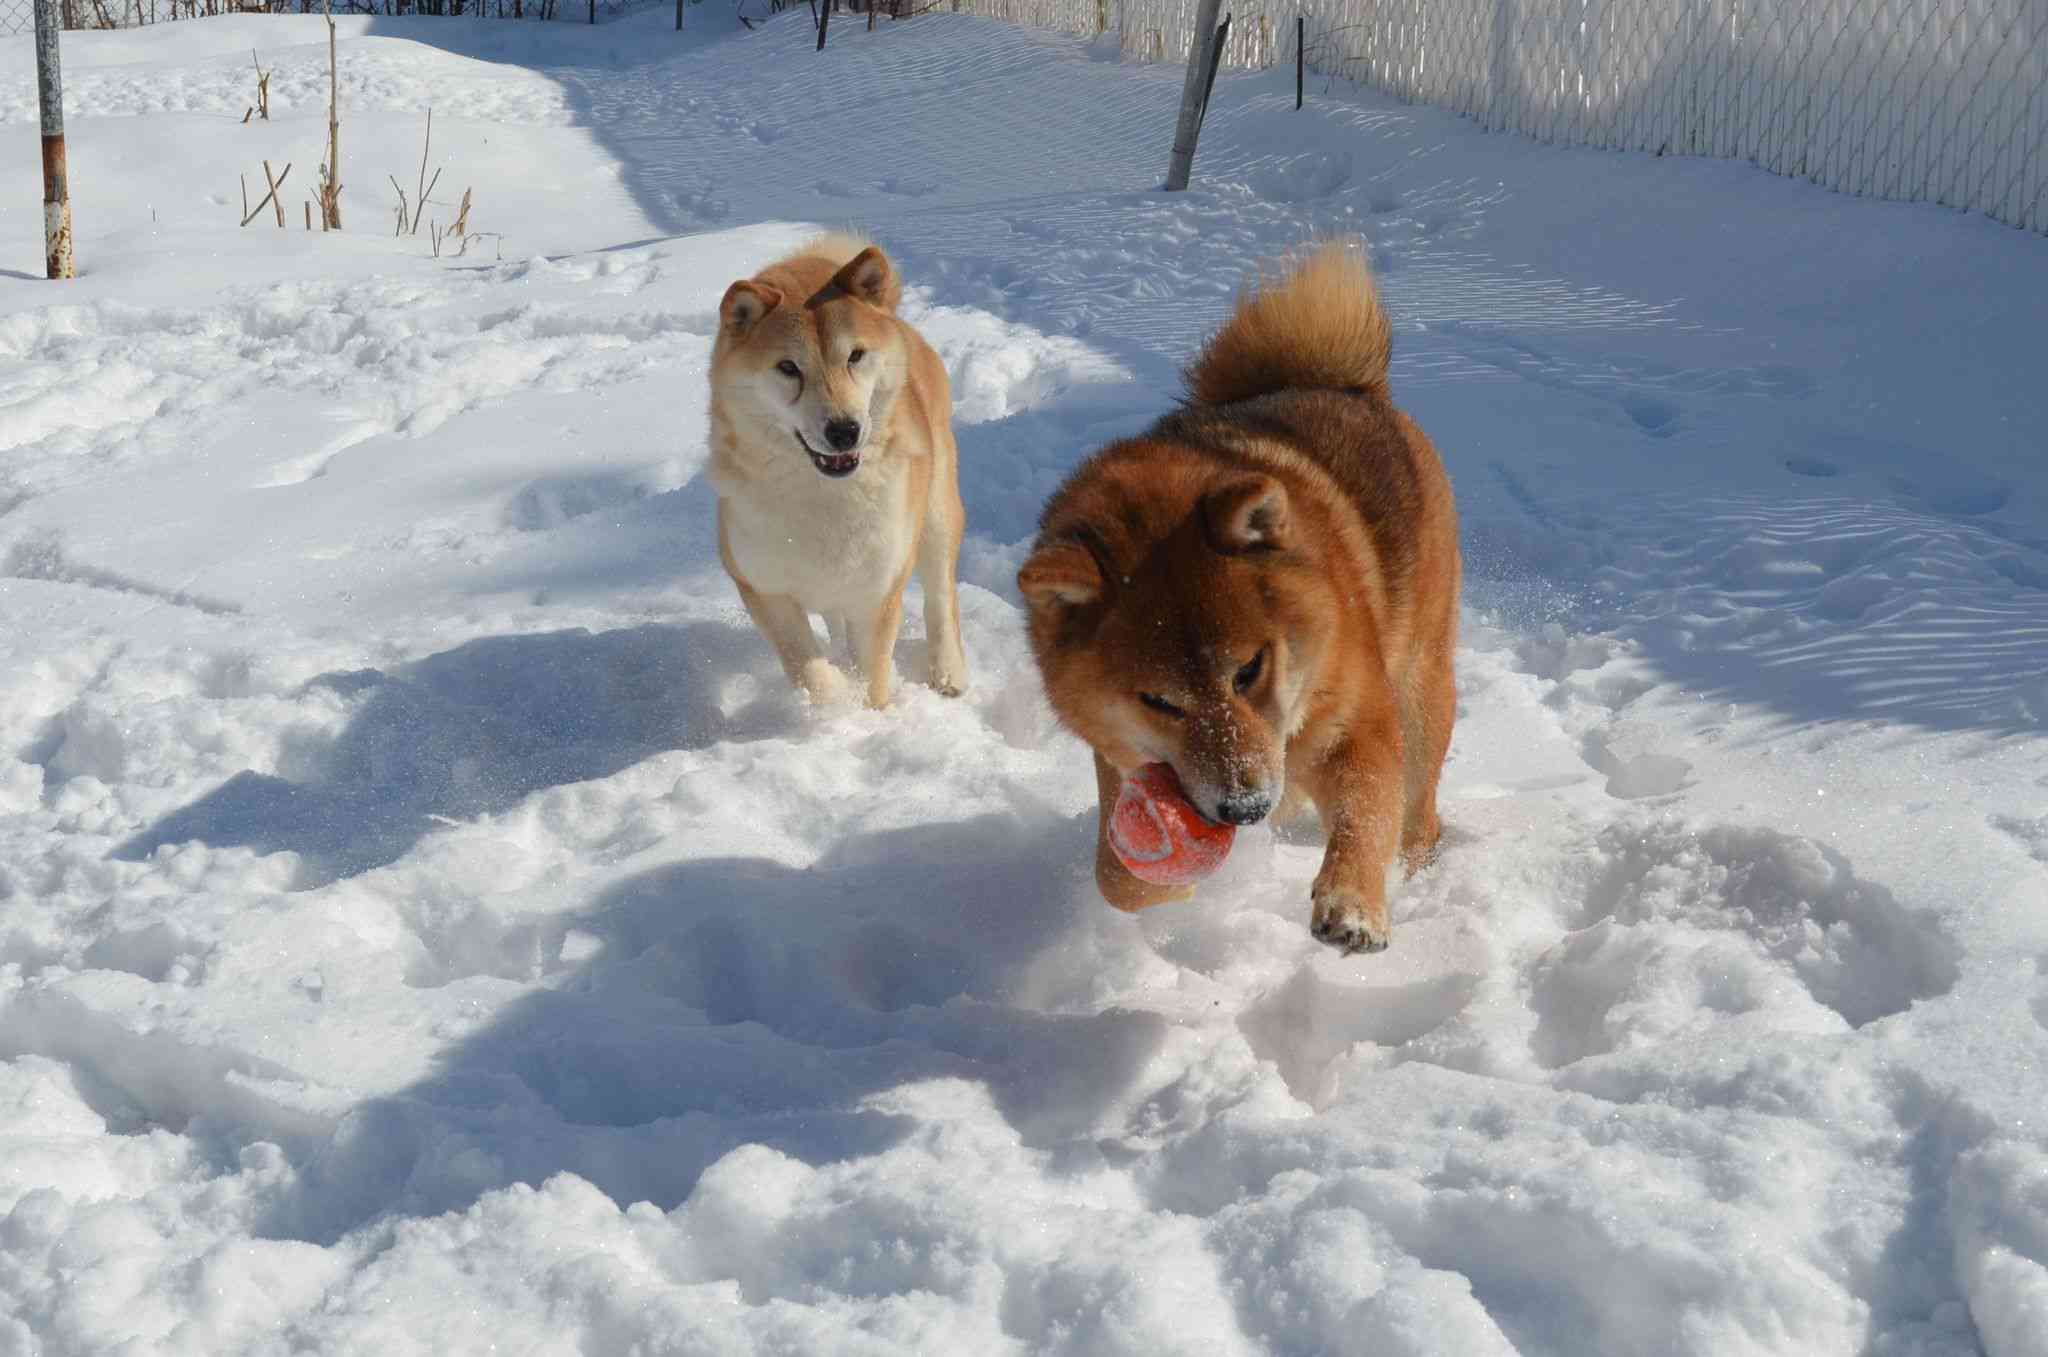 Dolphin (left) and Whale (right) chasing an orange ball in the snow